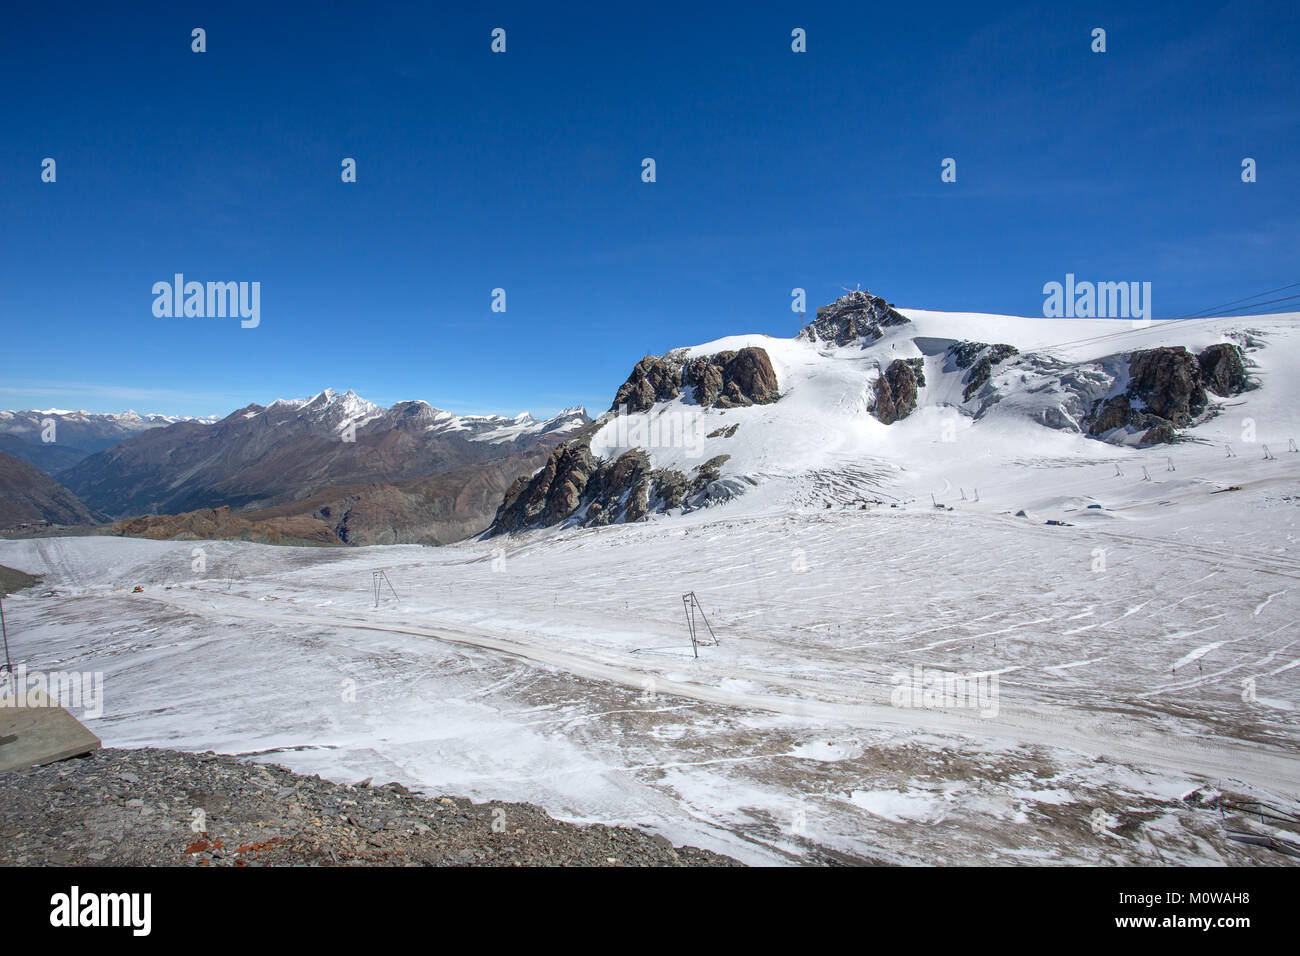 View of Plateau Rosa in Val D'Aosta, Italy. It is a glacier located in the Swiss Valais in the Pennine Alps, just beyond the Italian-Swiss border, in  Stock Photo